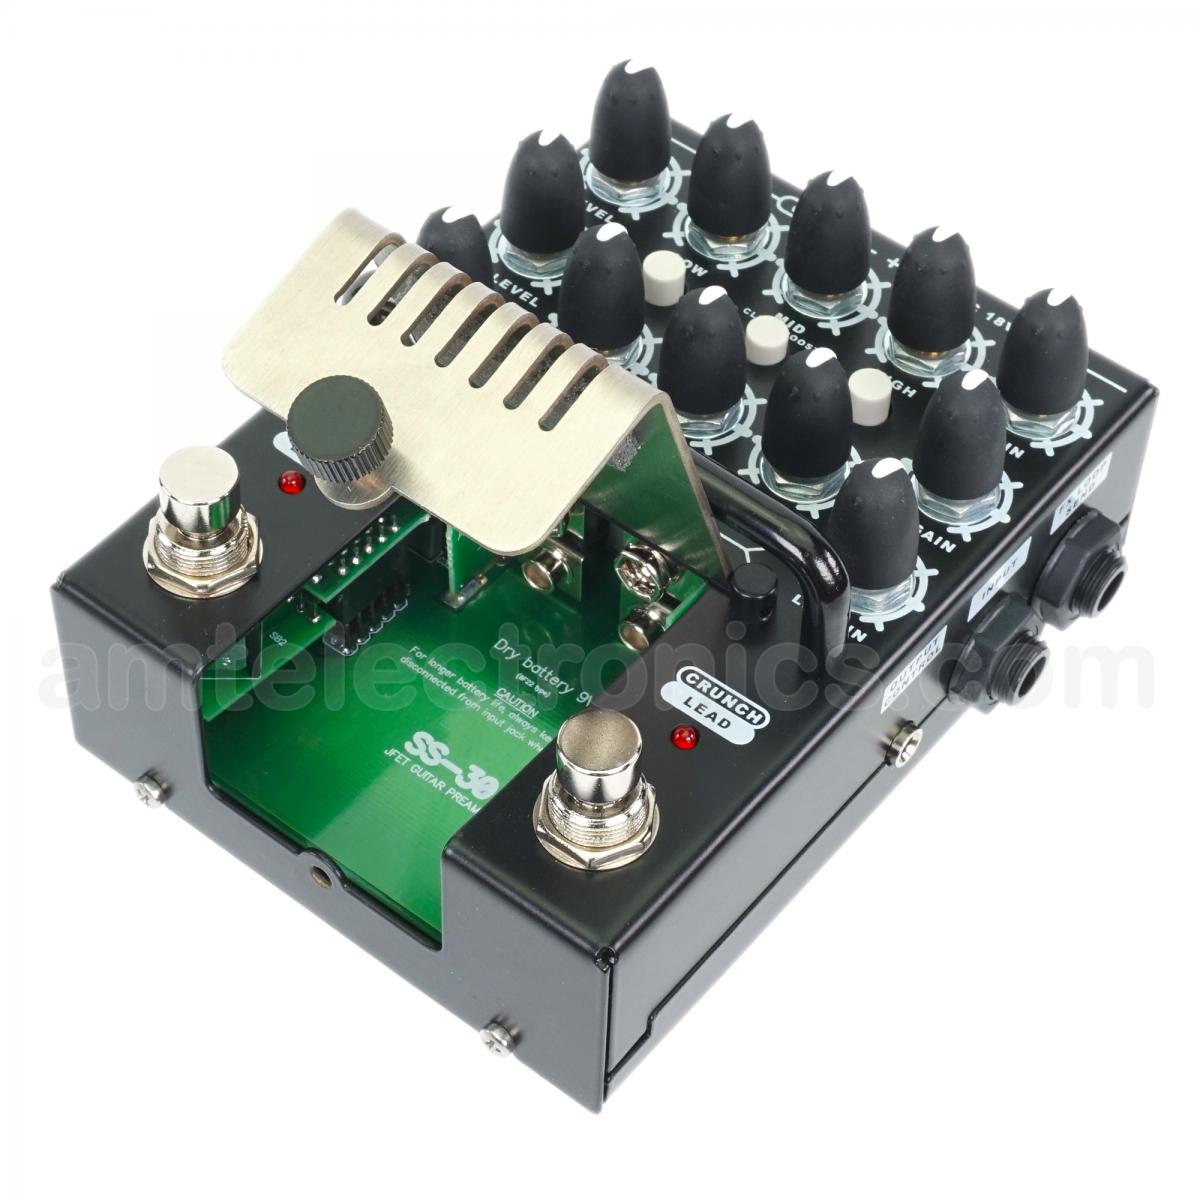 AMT SS-30 (Studio Series preamp) | AMT Electronics official website